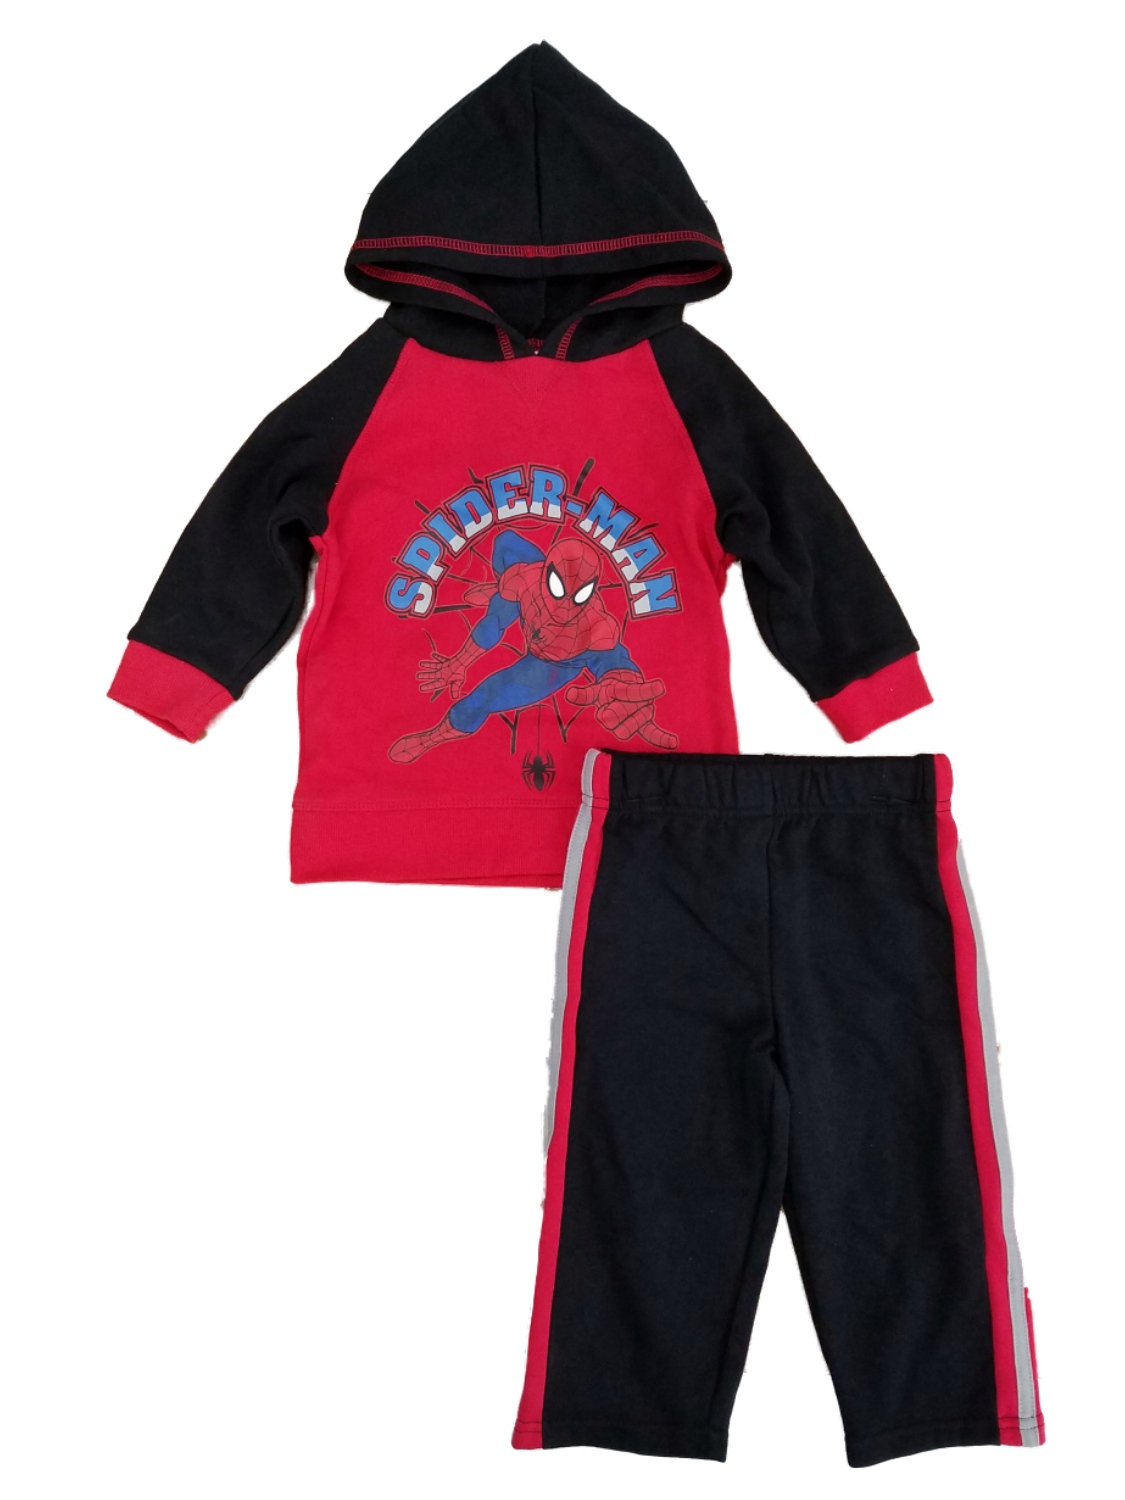 Marvel Infant Boys Spiderman Baby Outfit Red/Black Hoodie & Sweat Pants Set - image 1 of 1